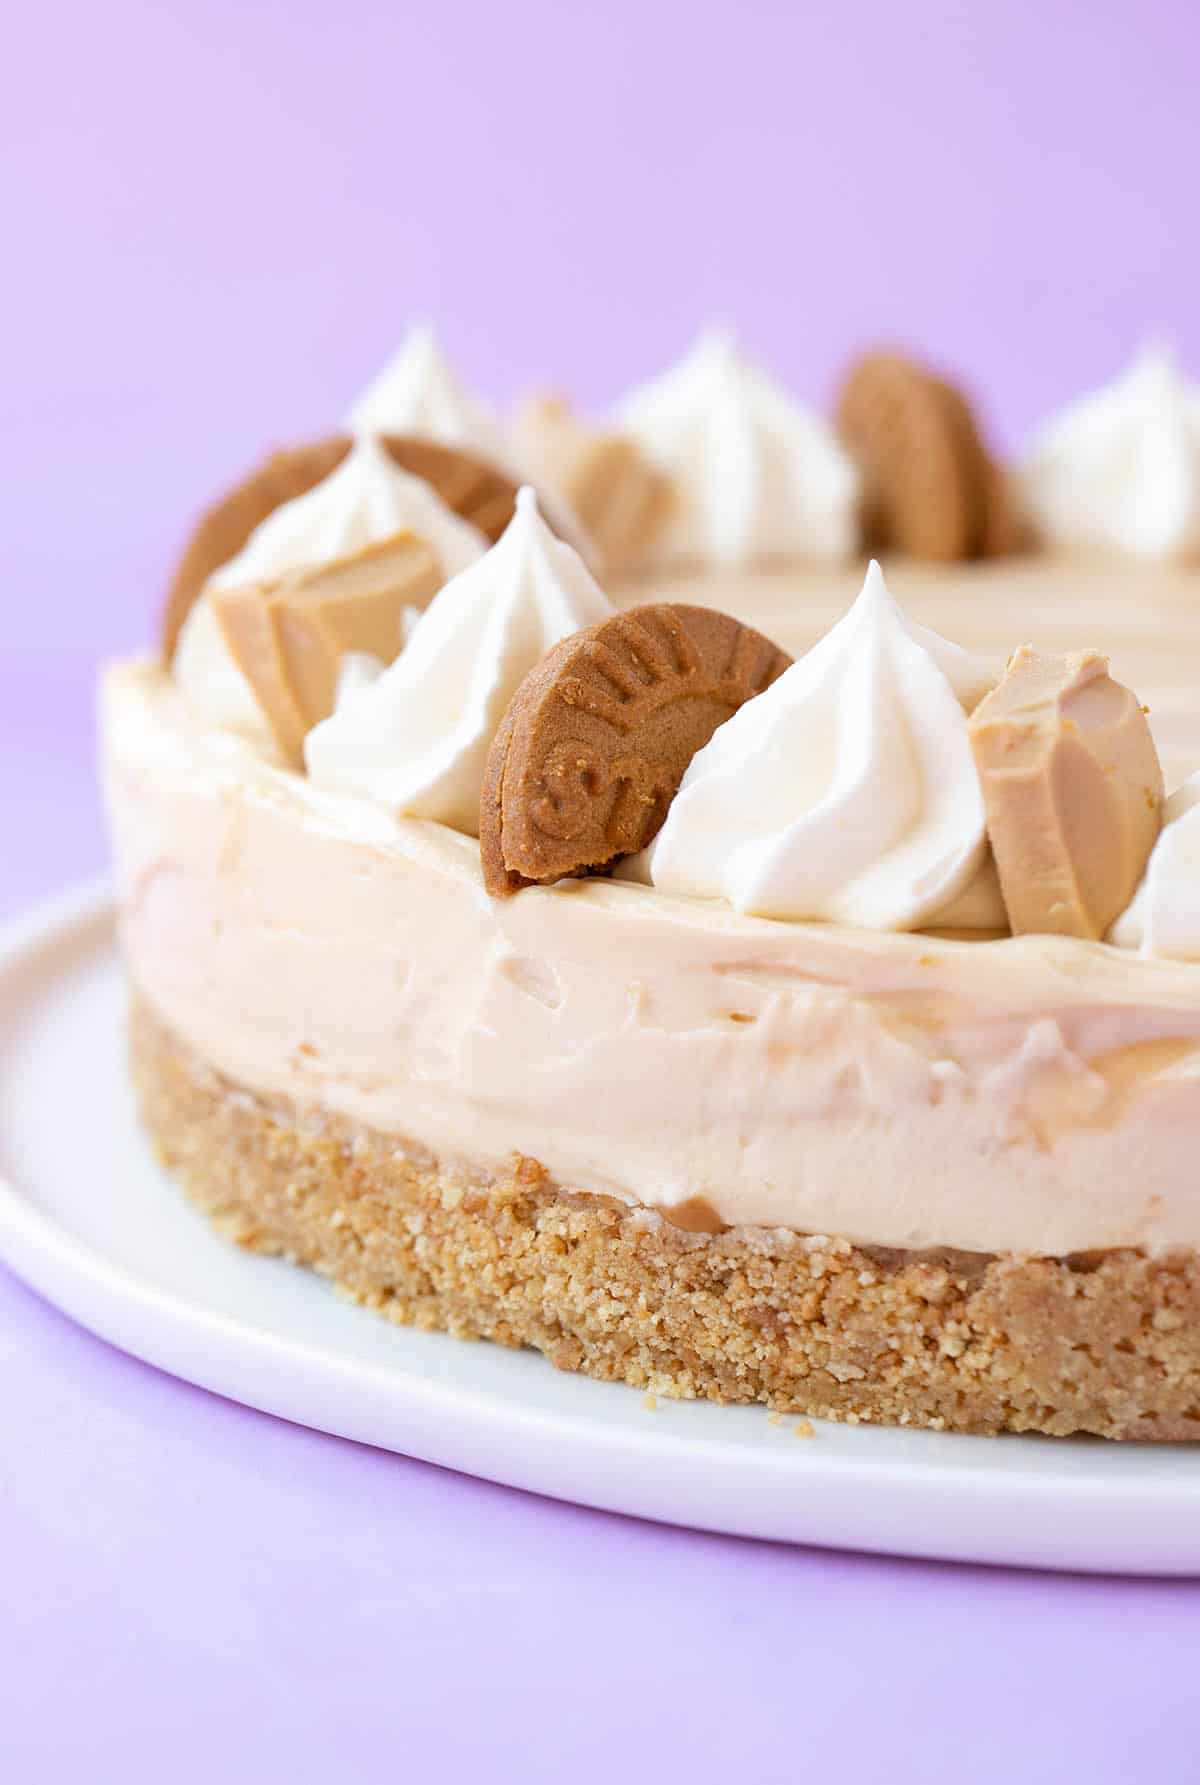 Close up of a beautifully decorated Caramilk Cheesecake on a purple background.